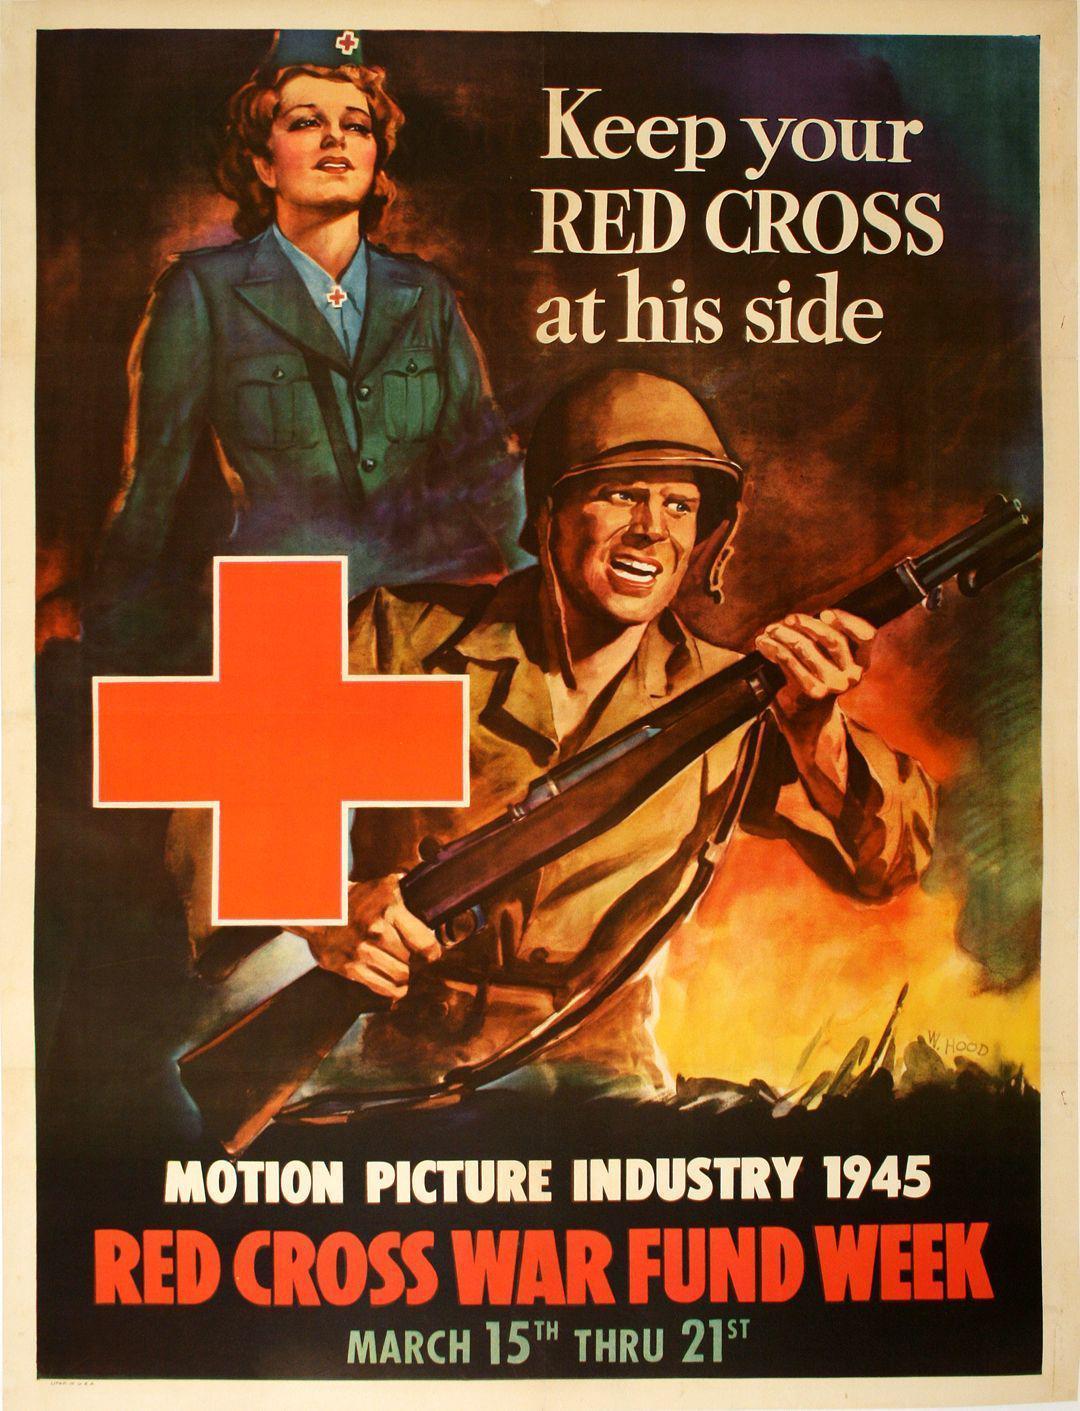 Original 1945 WWII Poster by Hood - Keep Your Red Cross at His Side